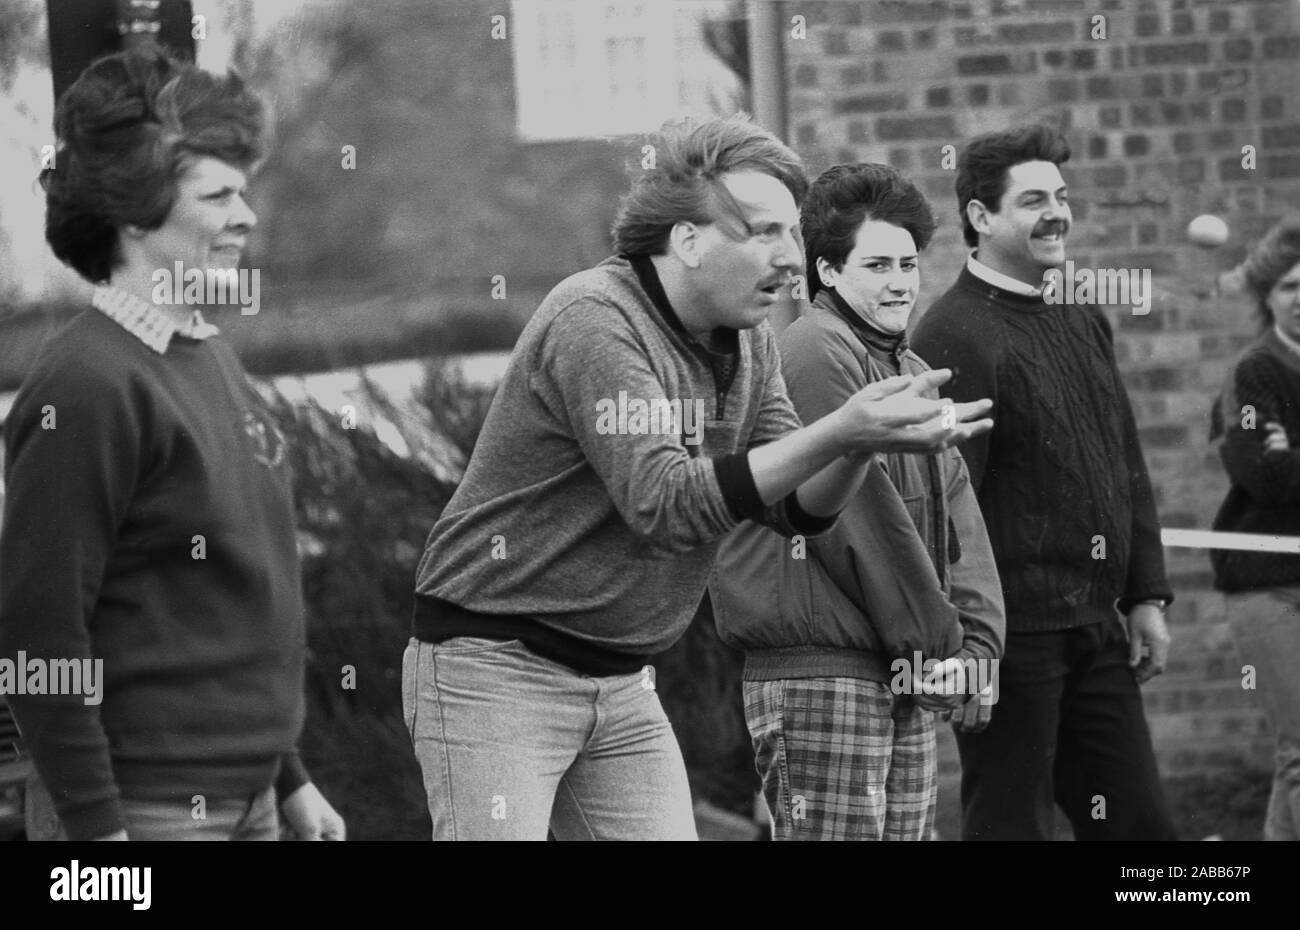 1980s, historical, outside spectators stand near a man taking part in a traditional egg throwing competition, attempting to catch the delicate egg which is in mid-air coming towards him, England, UK.  Egg throwing is a two person sport requiring distance lobbing and the ability to catch. Each team member begins by standing ten metres apart, spreading out after each successful catch. But....drop or break the egg and you are out! It is believed that egg throwing first occurred in the 1300s, gradually becoming an informal sport called the 'egg toss', played at country fairs and fetes. Stock Photo